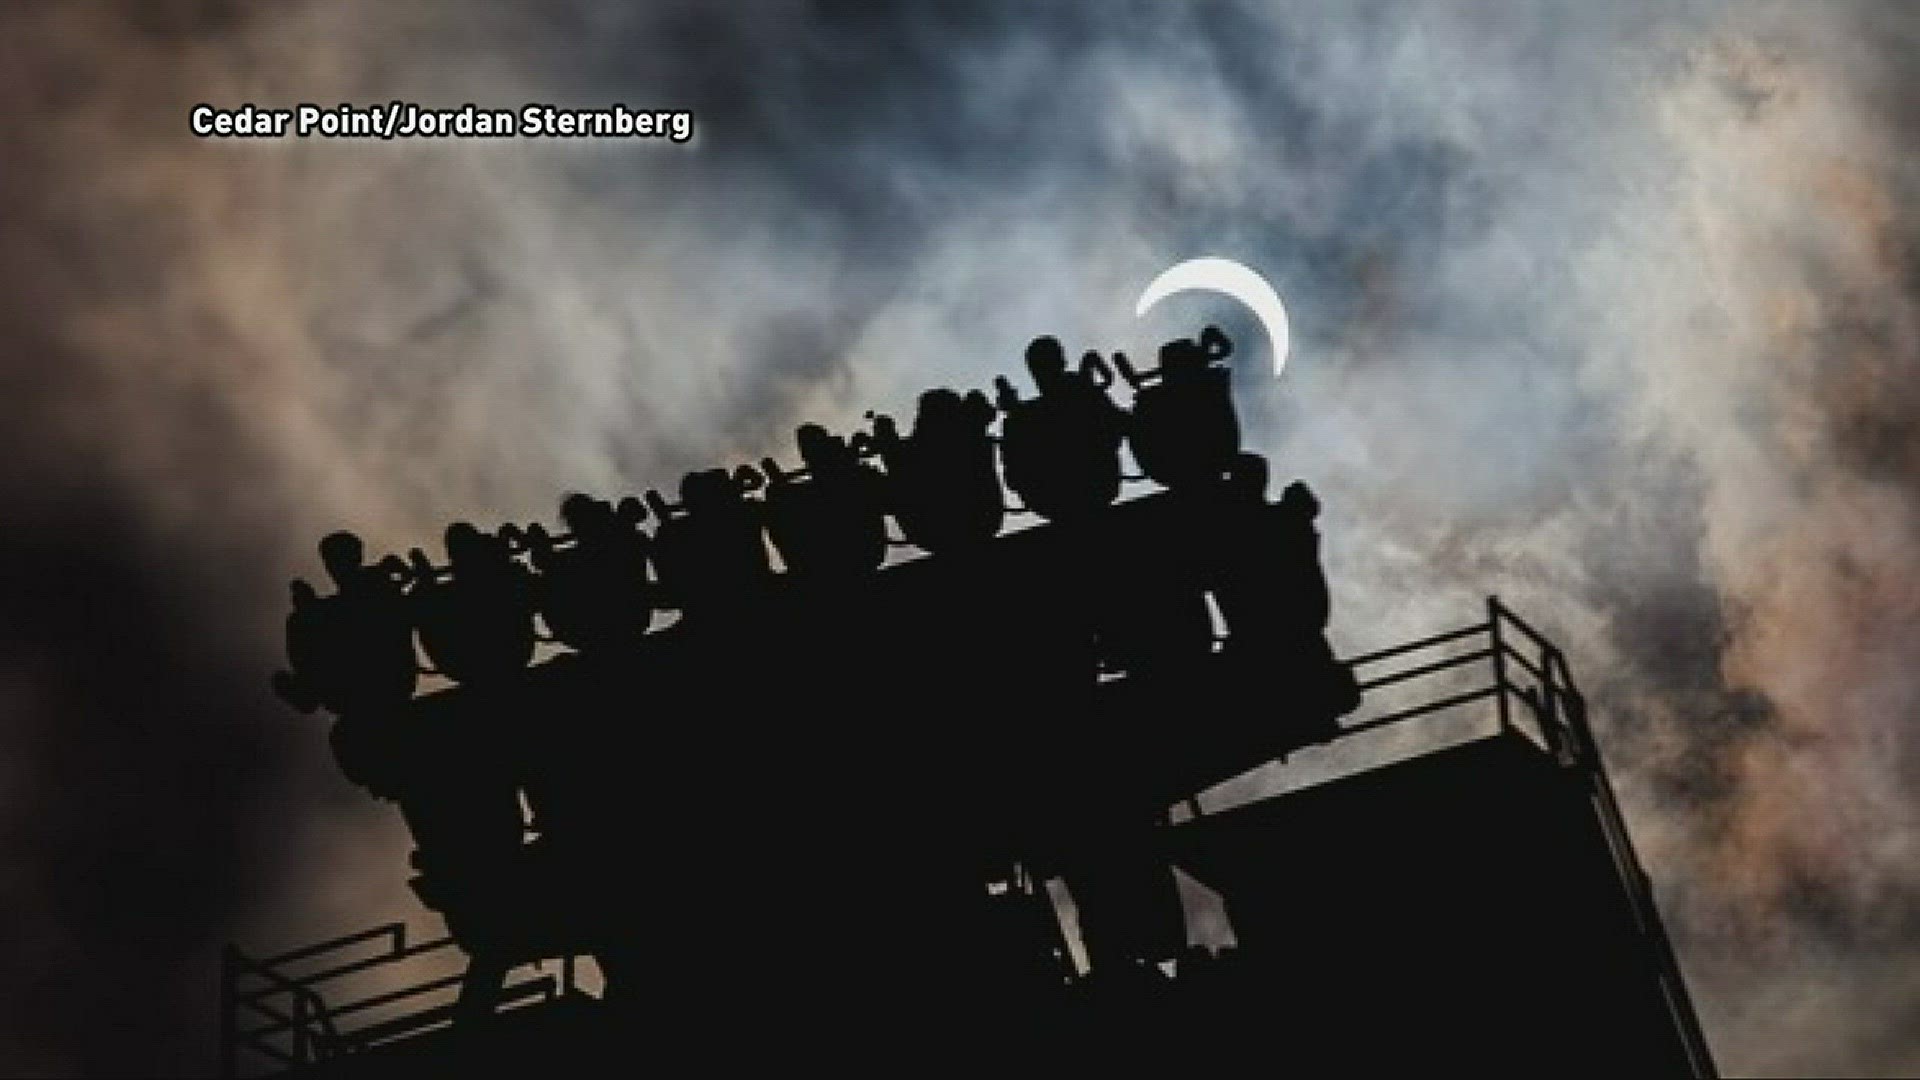 Cedar Point shows epic eclipse photo from roller coaster